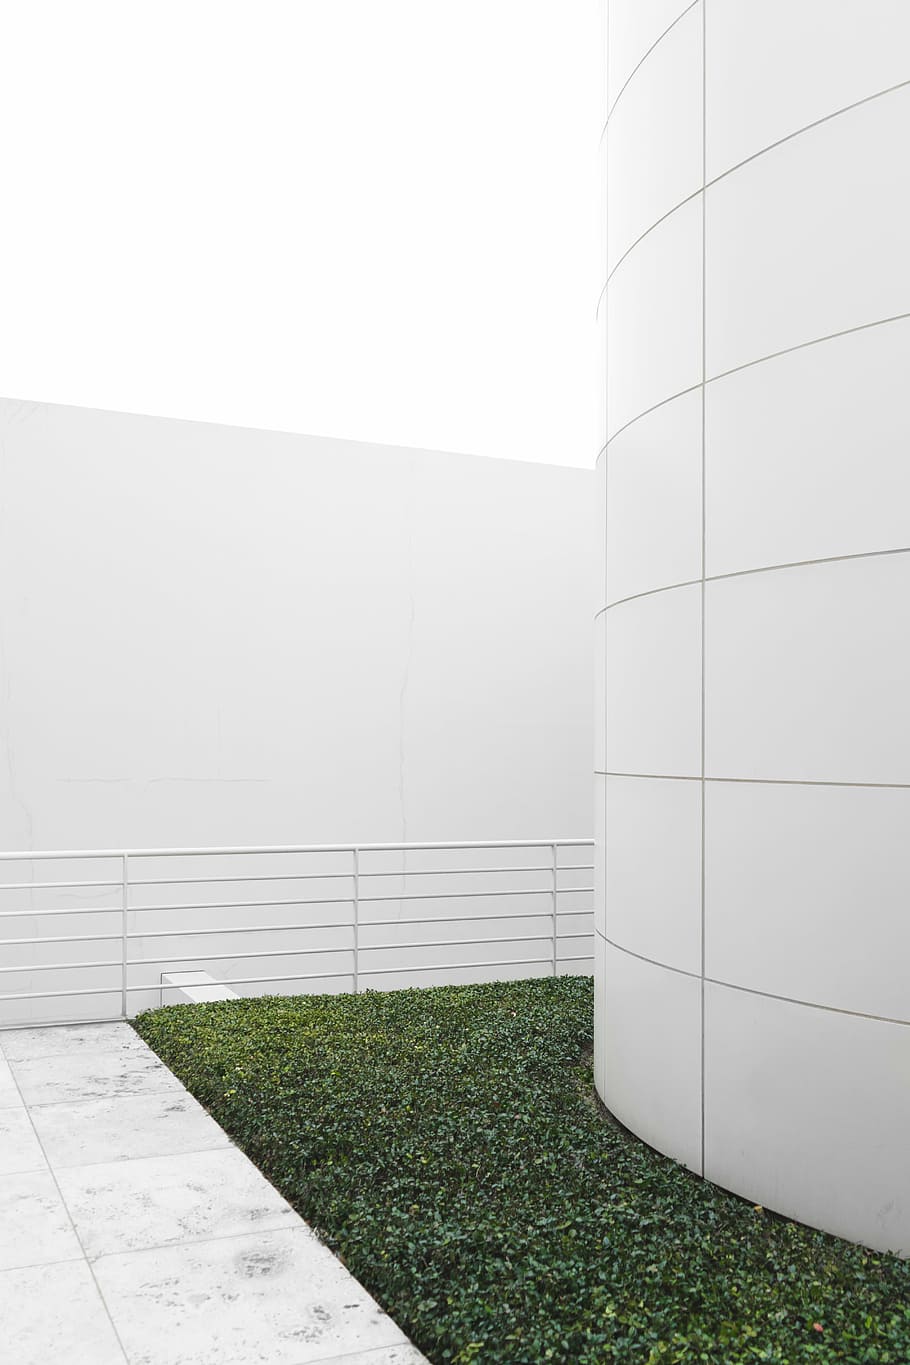 white, painted, wall, green, grass, architecture, building, infrastructure, design, outside